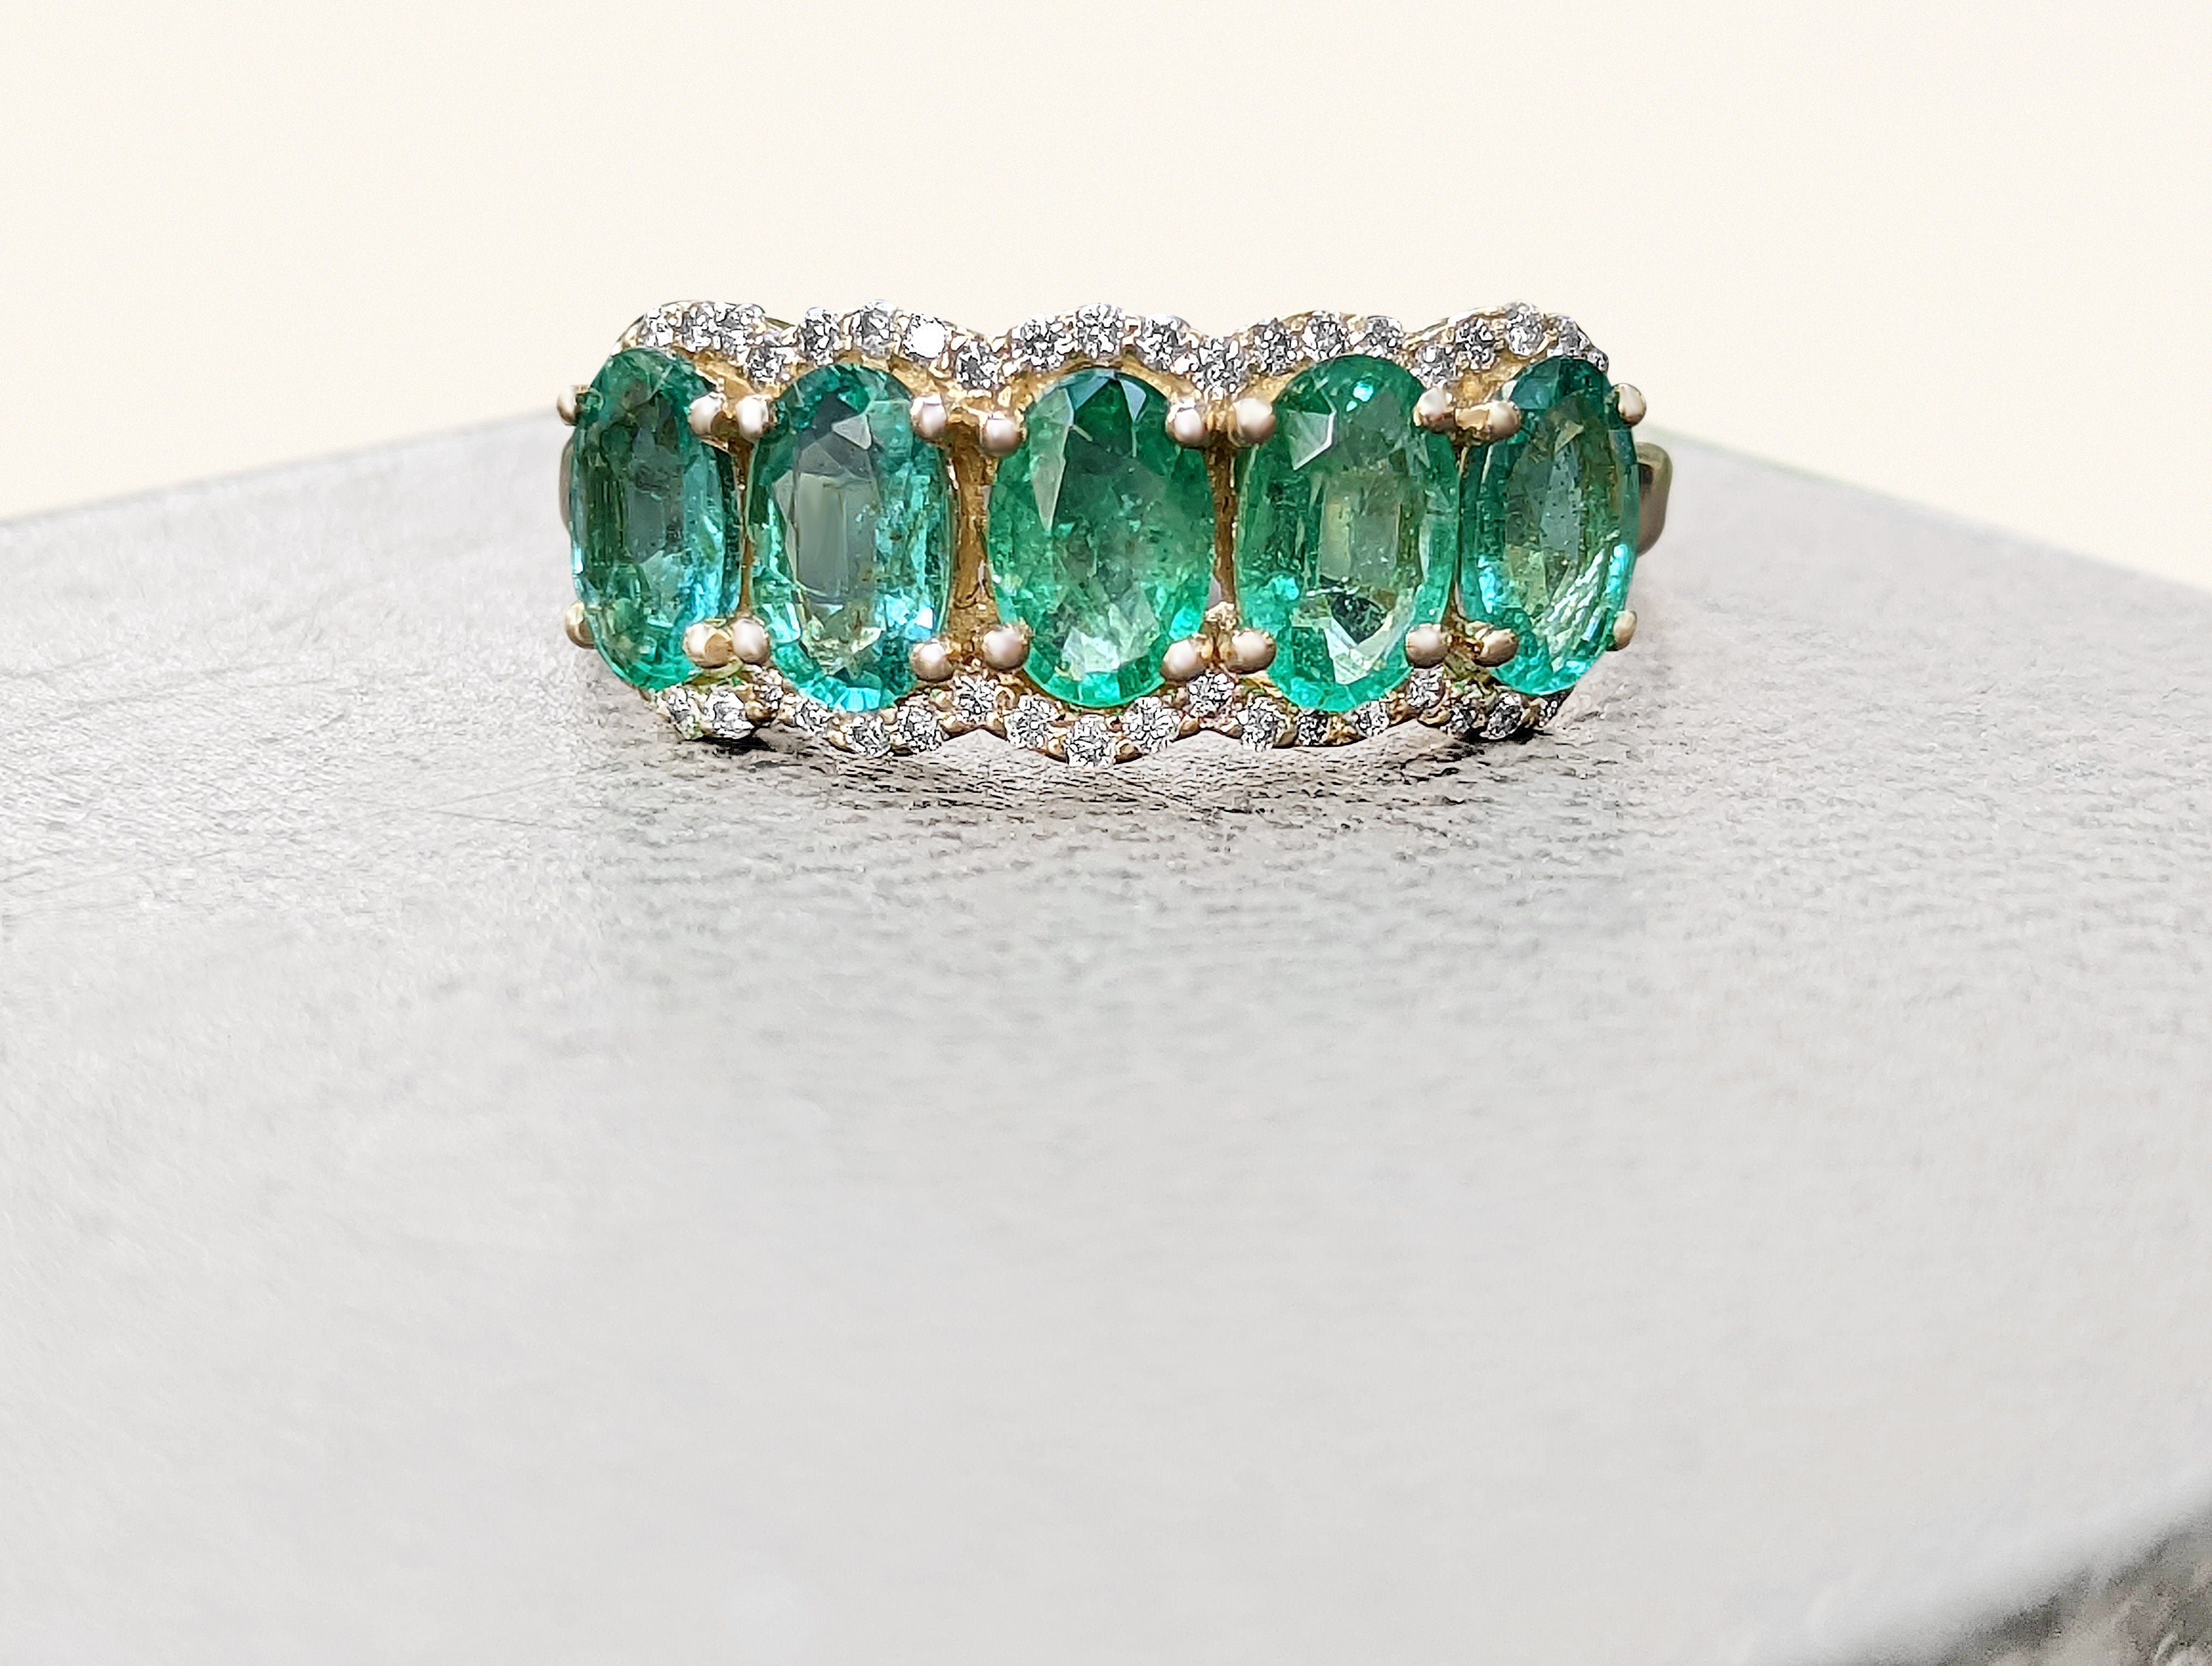 Ring can be sized free of charge prior to shipping out.

Center Stone:
___________
Natural Emerald
Cut: Oval Mixed
Carat: 1.82 ctw, 5 stones
Color: Green

Side Stones:
___________
Natural Diamonds
Cut: Round 
Carat: 0.20 tccw / 50 stones
Color: